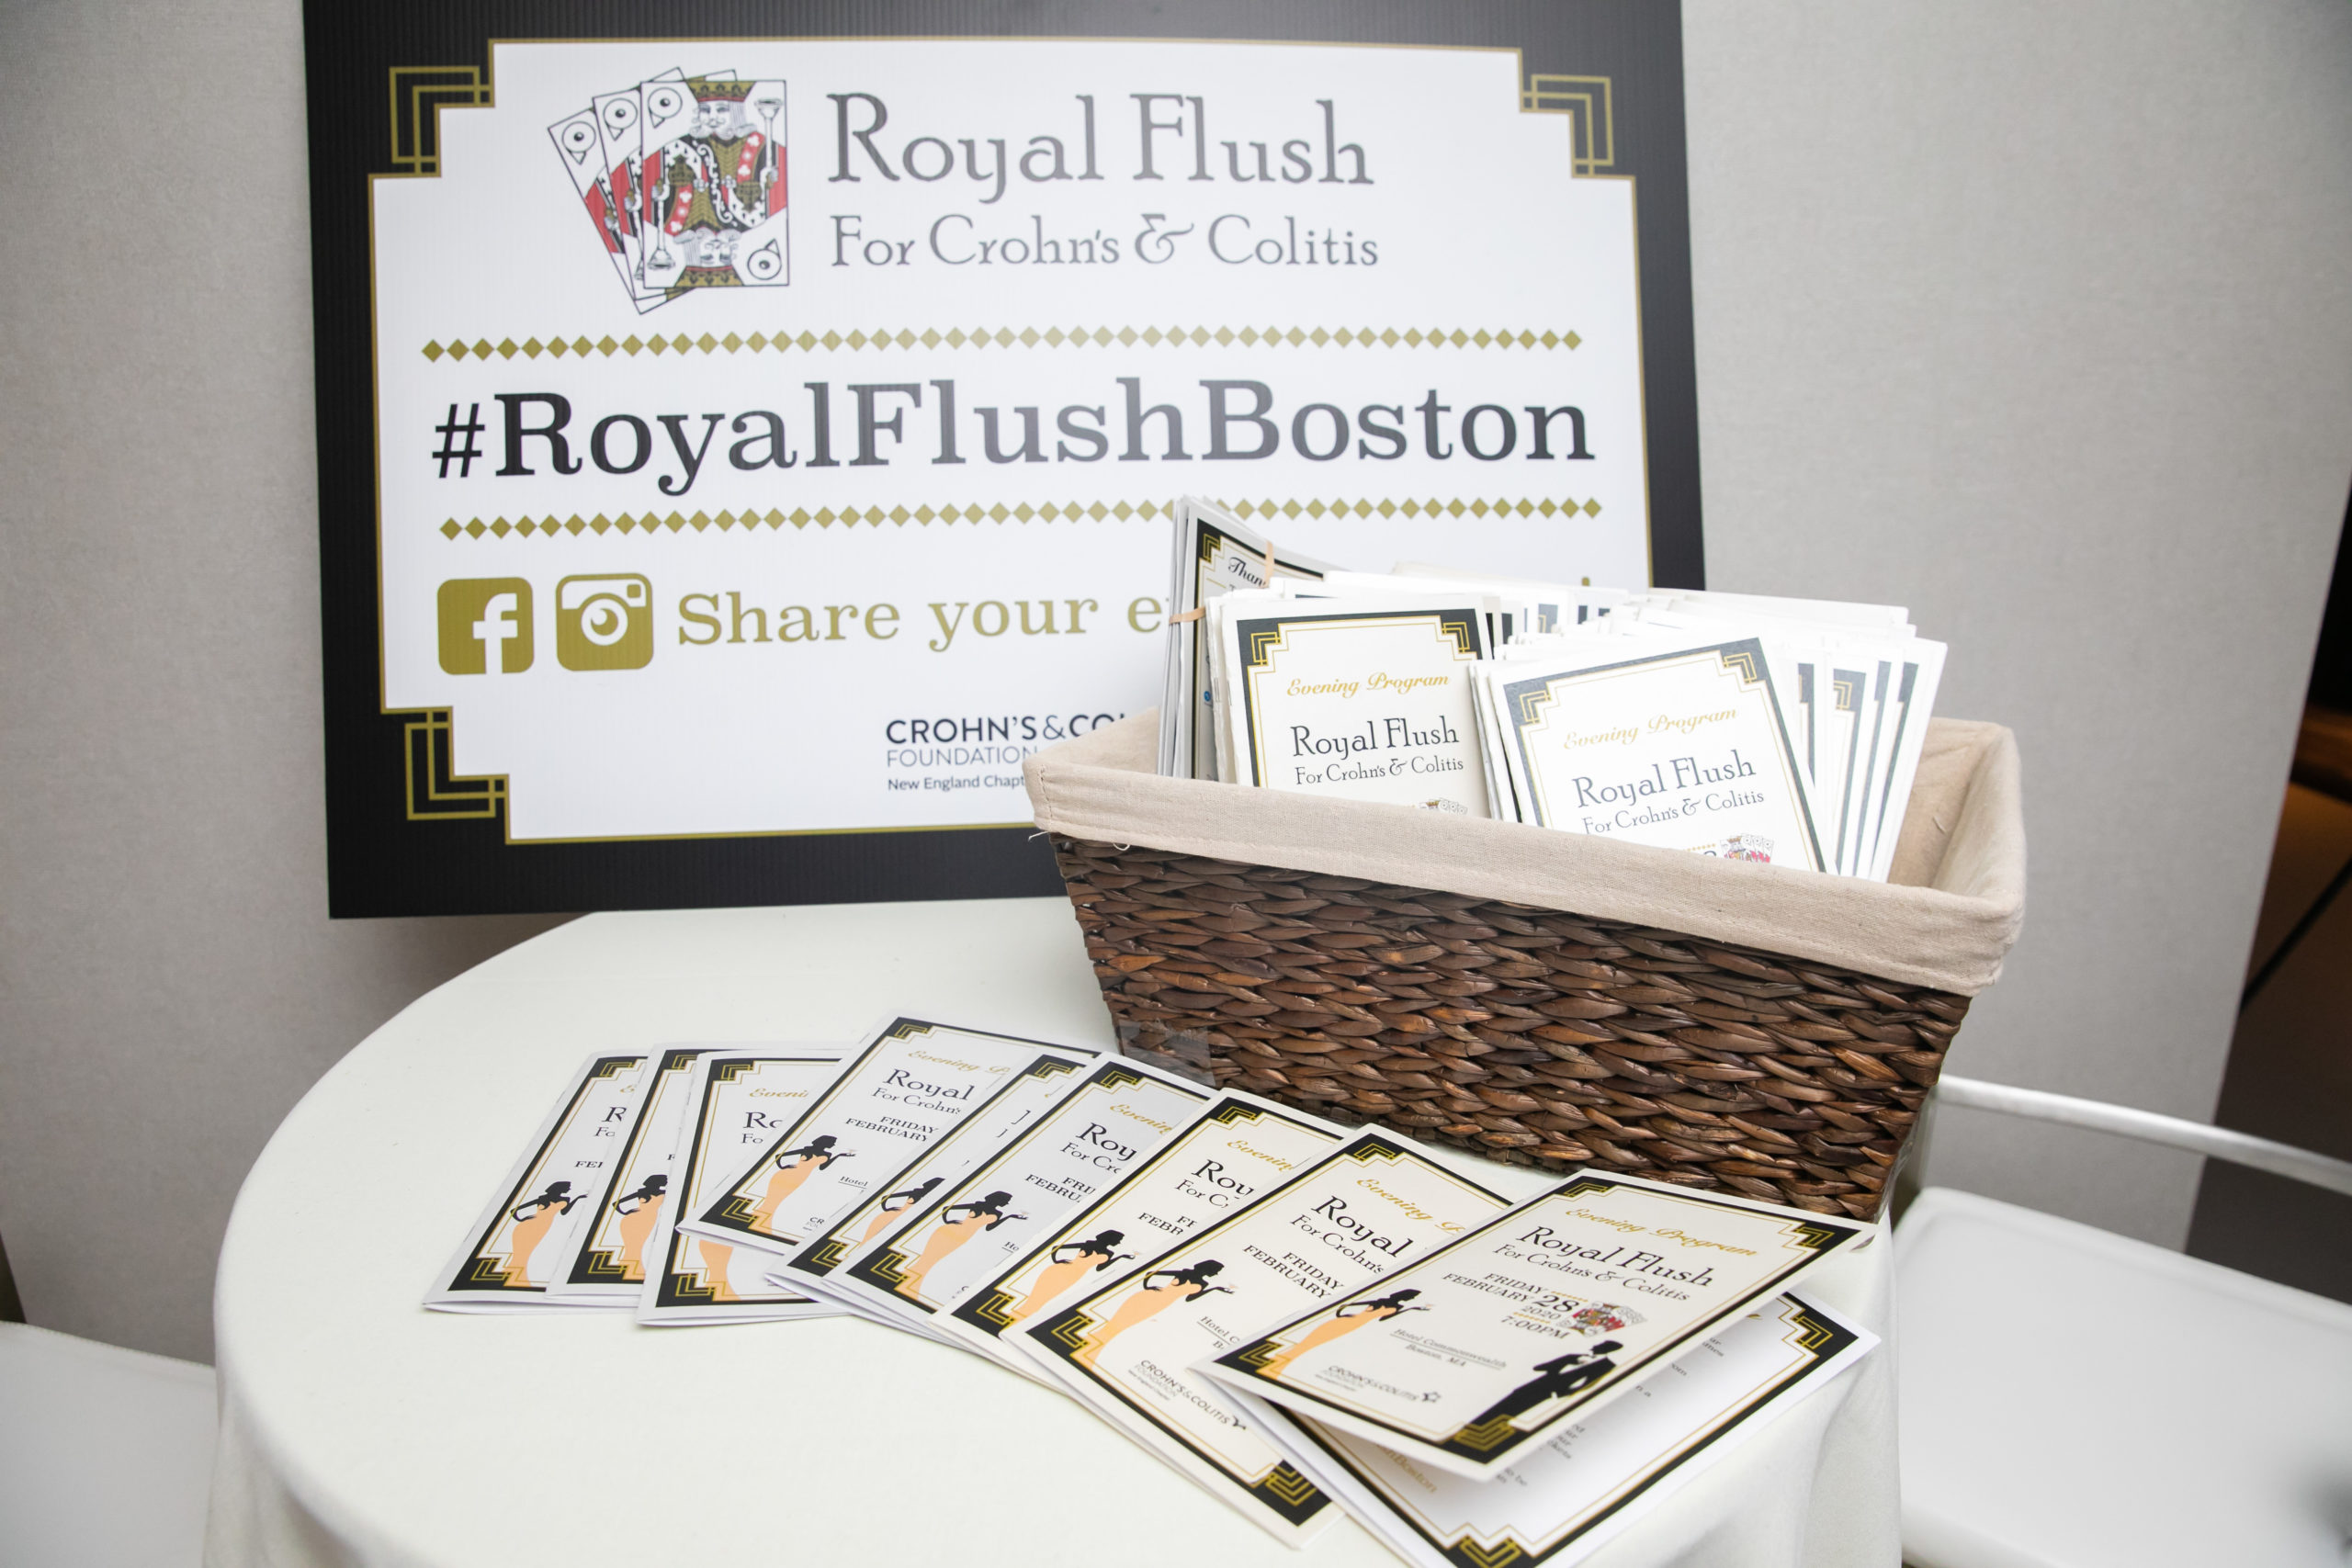 Crohn's & Colitis royal flush indoor sign and brochures